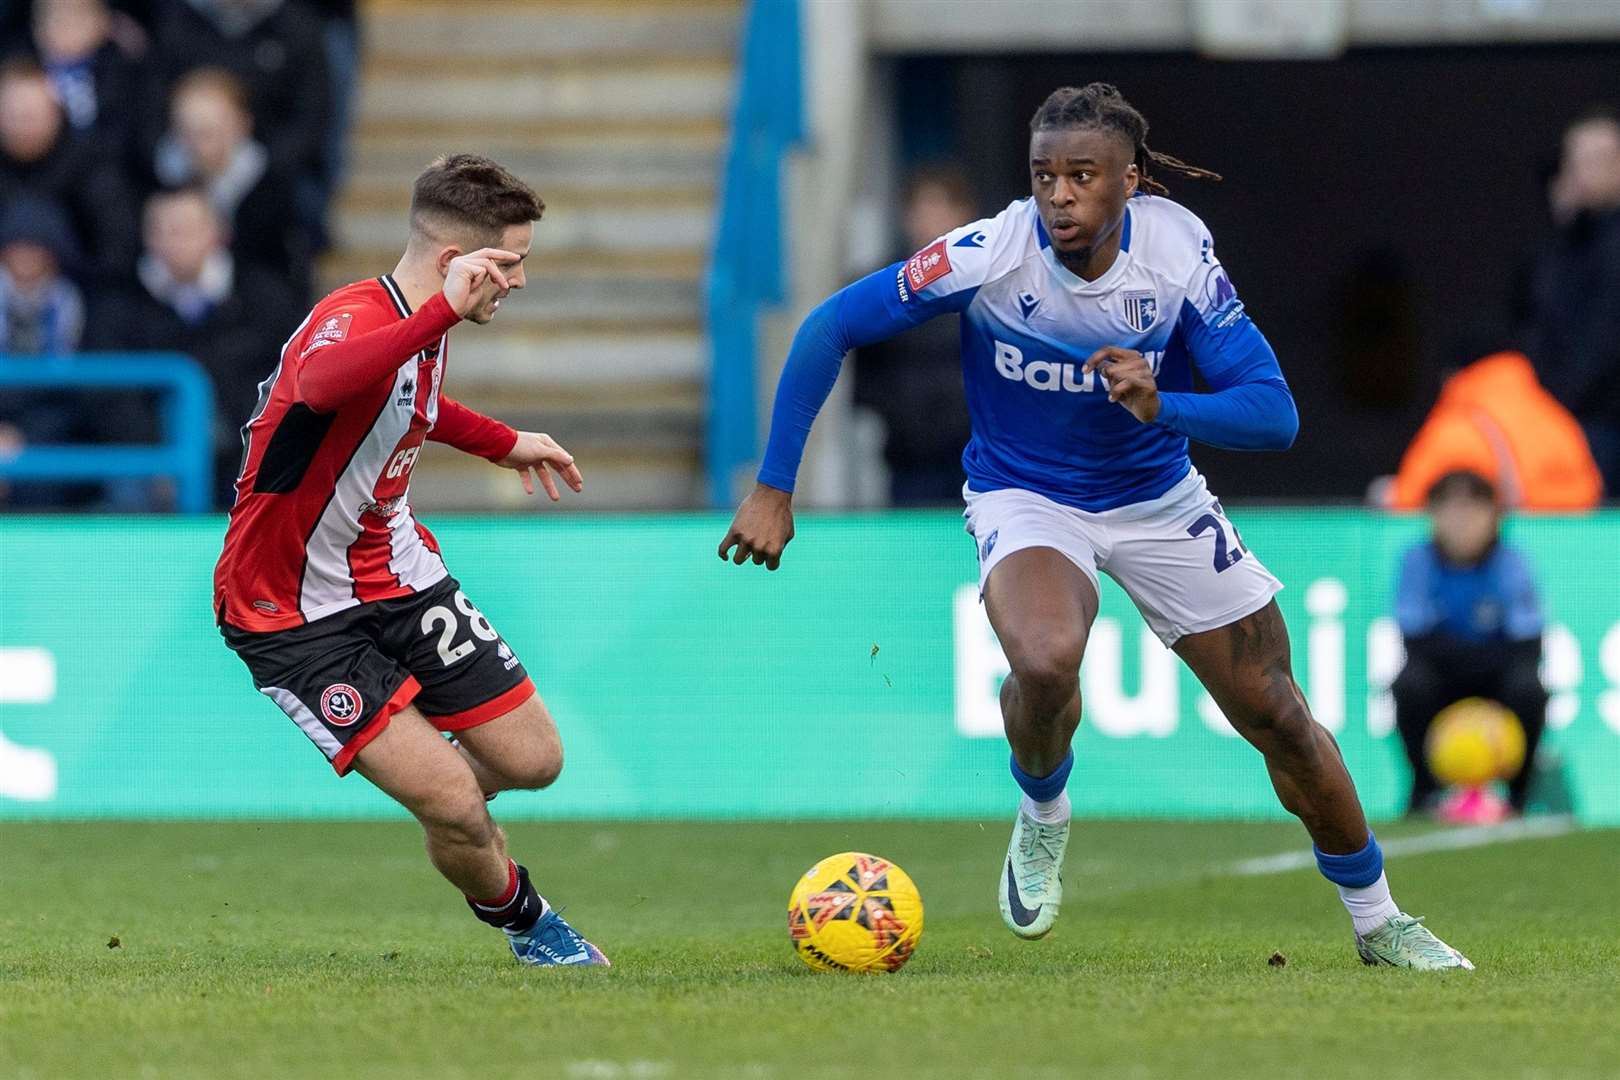 Shad Ogie looks to take his man on as Gillingham went up against Sheffield United in the FA Cup third round Picture: @Julian_KPI